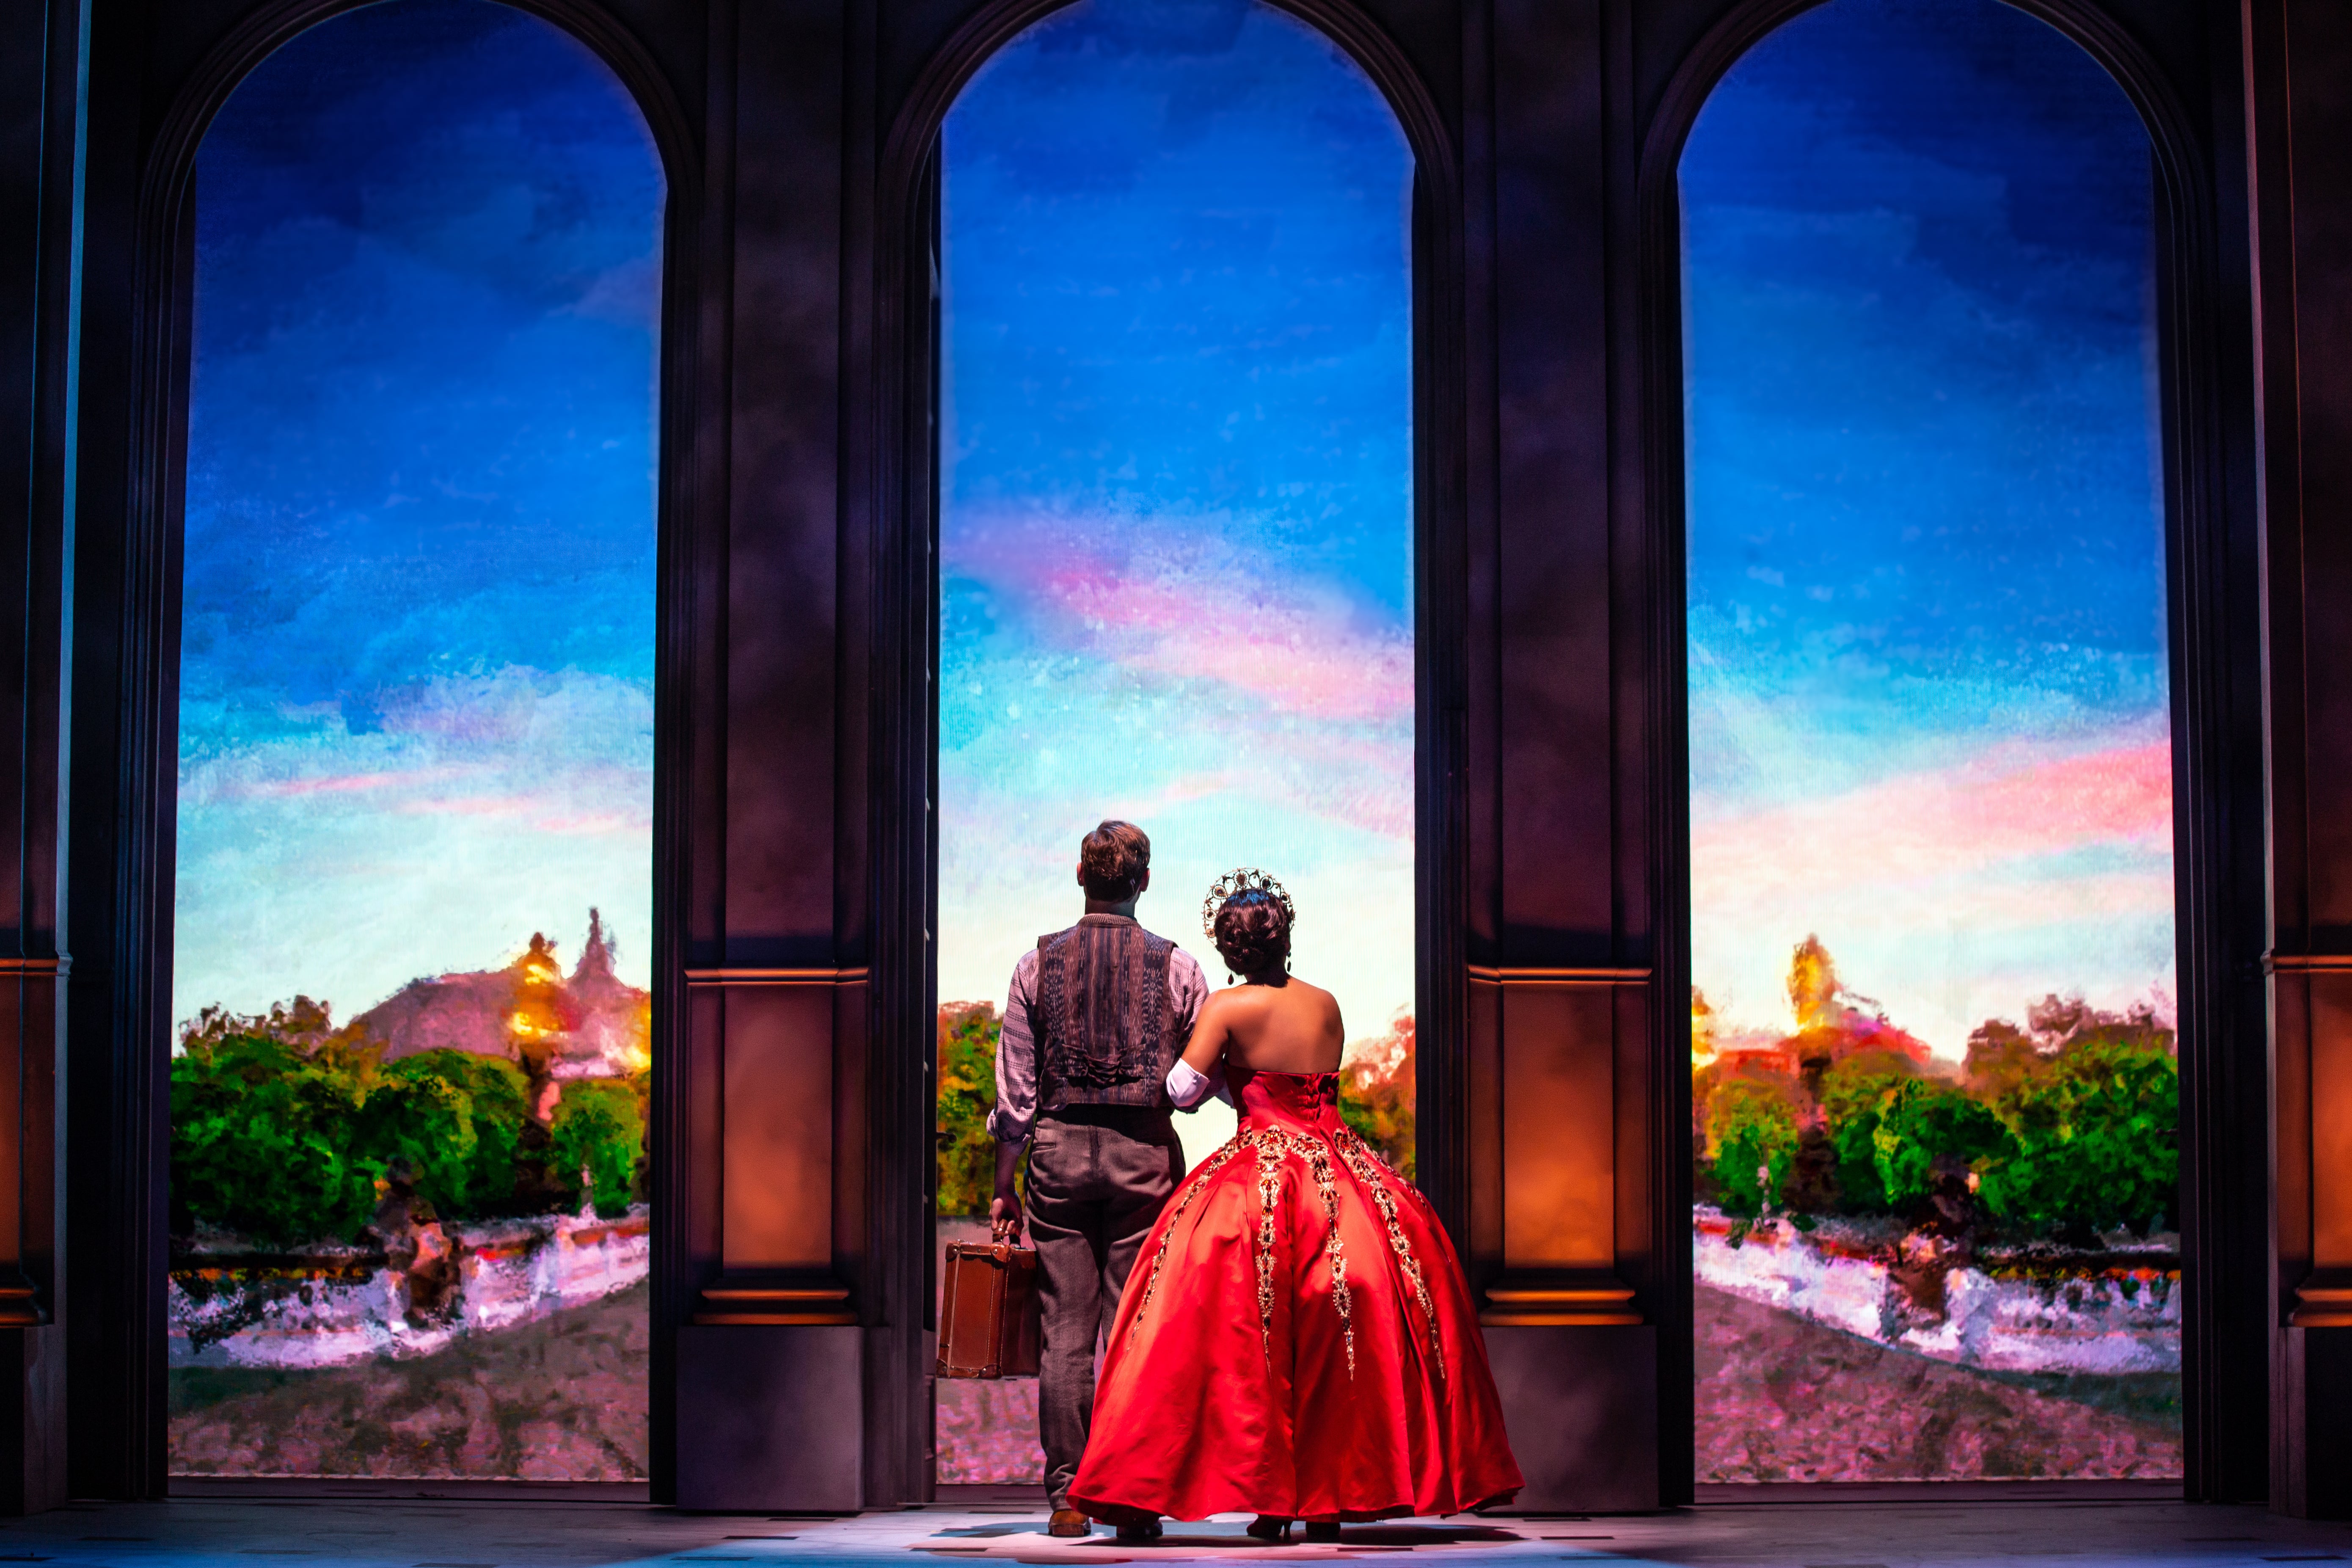 More Info for Calling all artists, crafters and costume designers! Enter the Queen City Crown Contest for a chance to win 4 tix to see ANASTASIA!